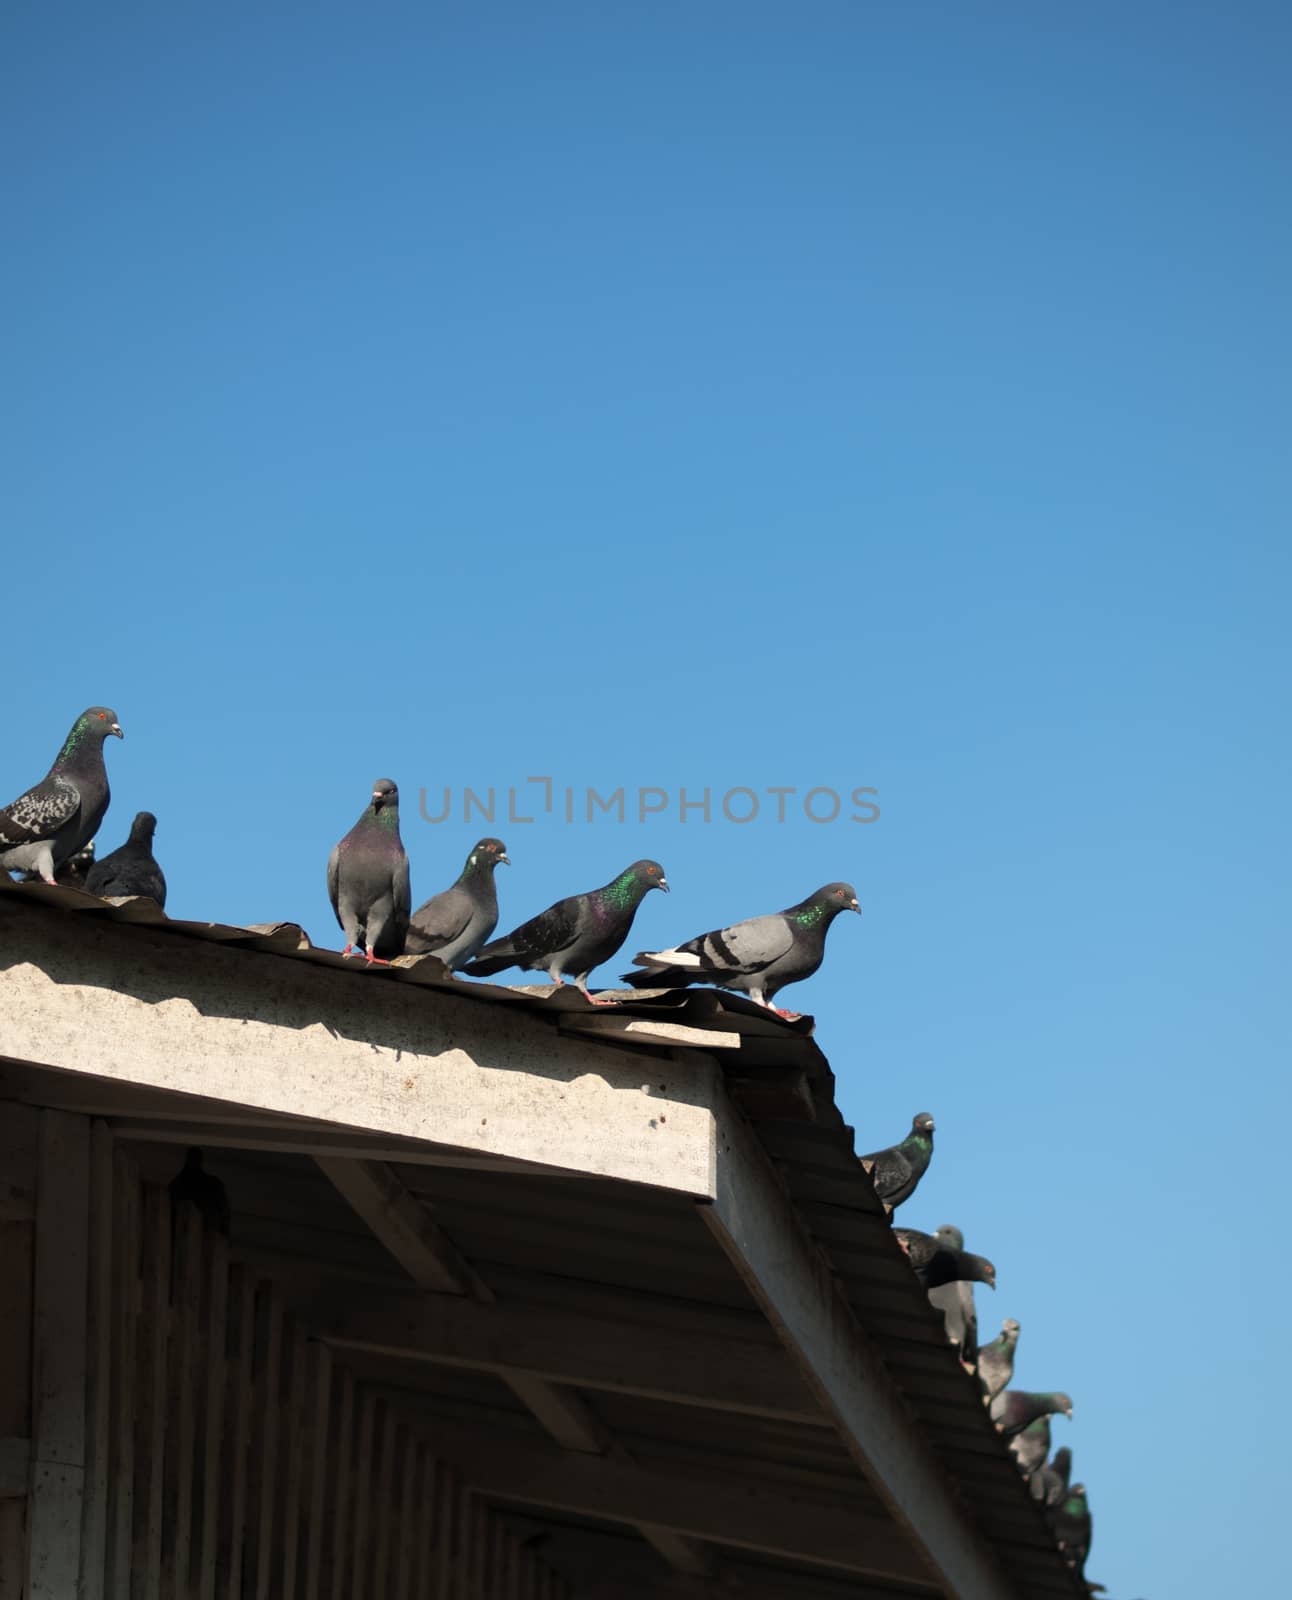 COLOR PHOTO OF PIGEONS ON THE ROOF